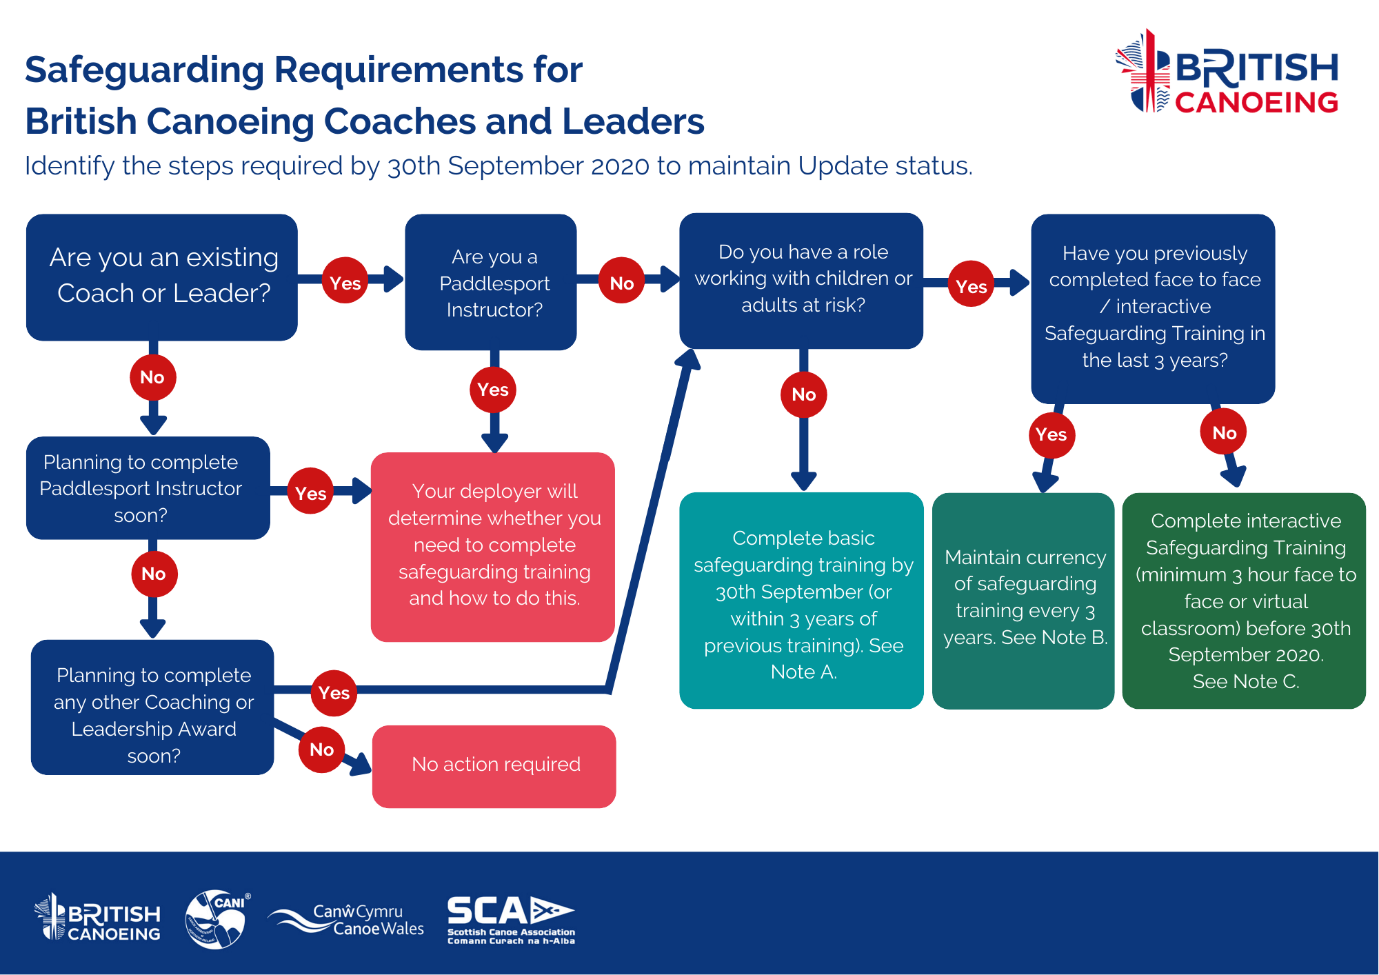 Flow chart diagram showing safeguarding requirements for British Canoeing coaches and leaders